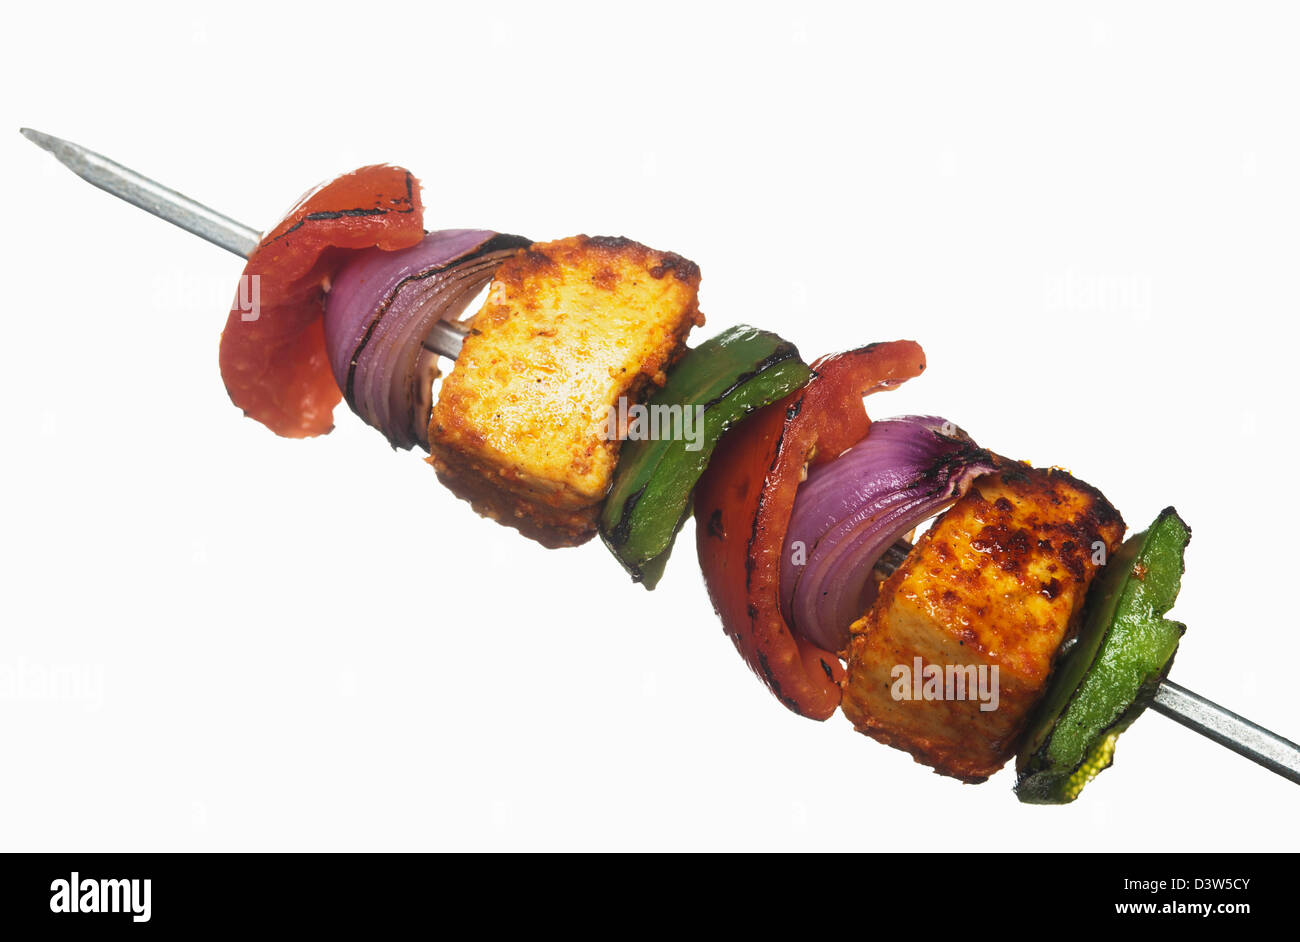 Close-up of grilled vegetable kebab Stock Photo